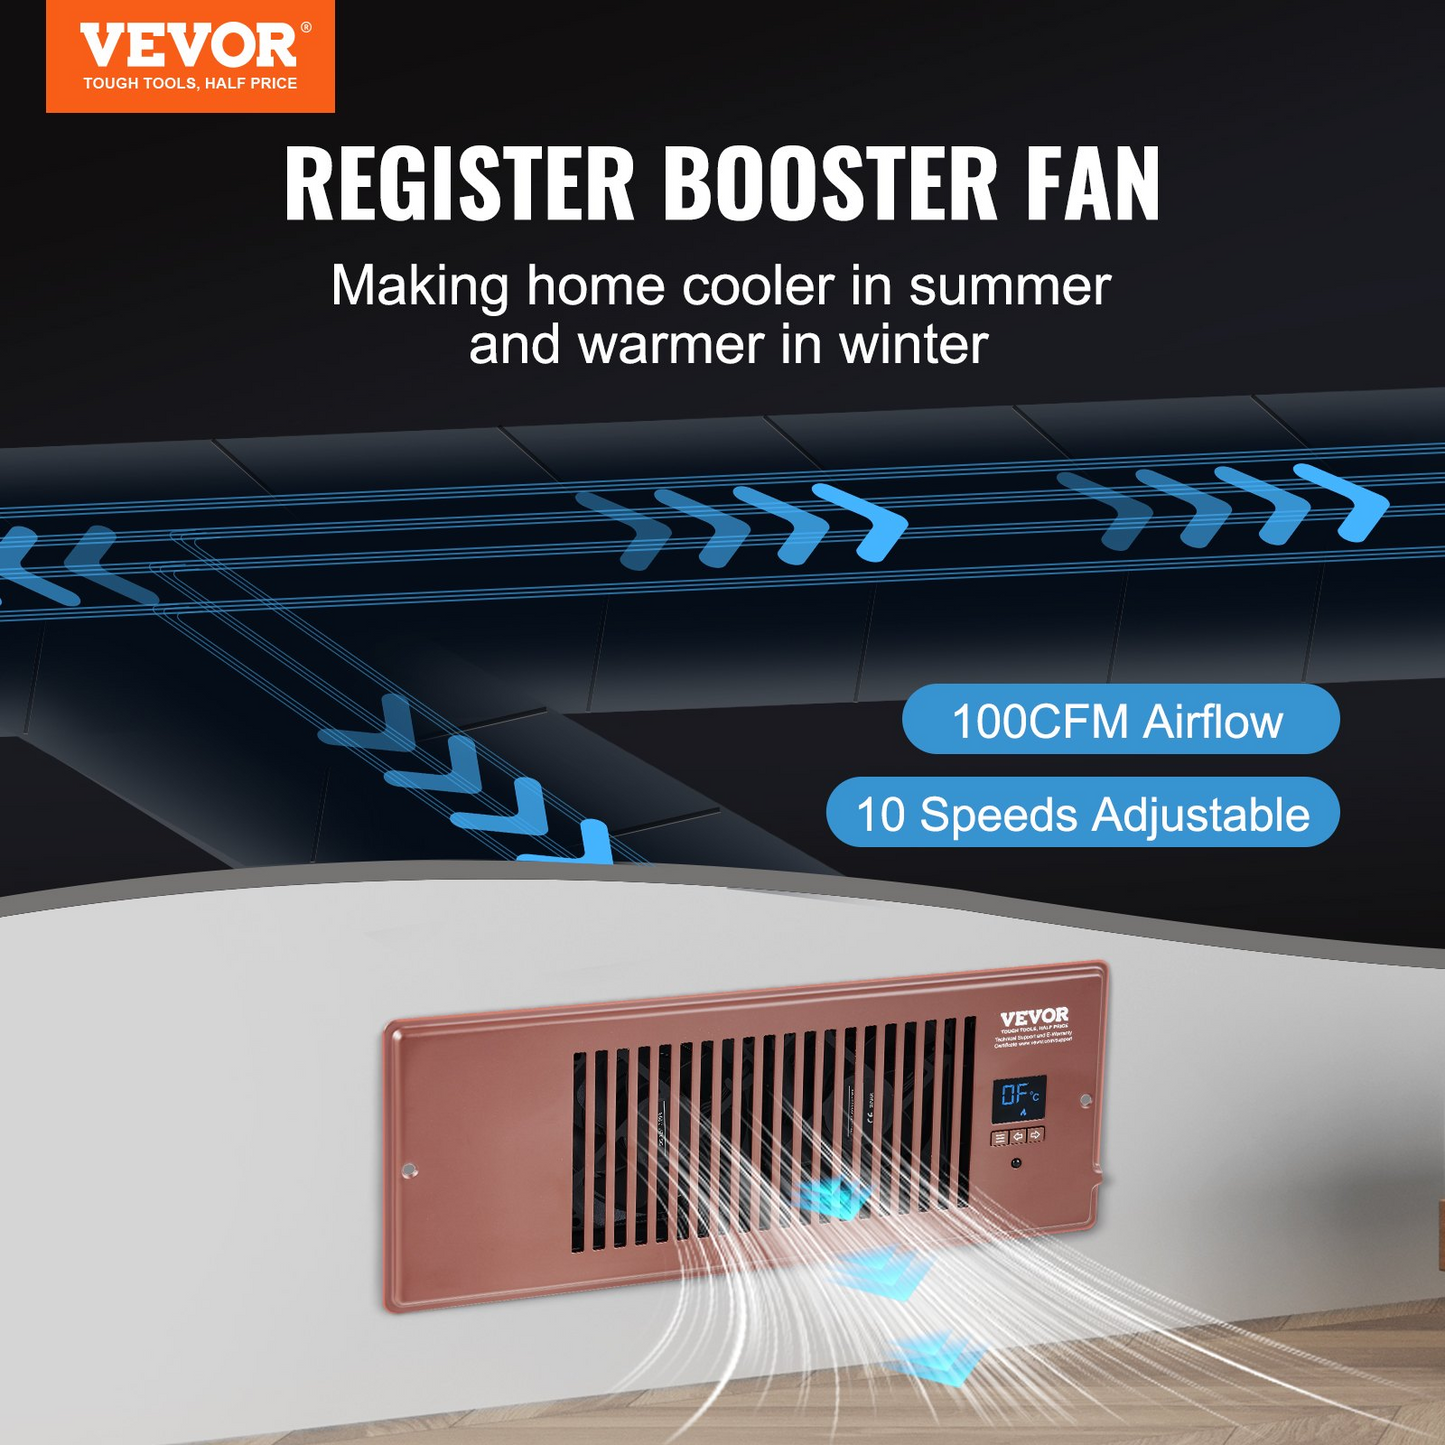 VEVOR Register Booster Fan, Quiet Vent Booster Fan Fits 4” x 12” Register Holes, with Remote Control and Thermostat Control, Adjustable Speed for Heating Cooling Smart Vent, Brown, Goodies N Stuff